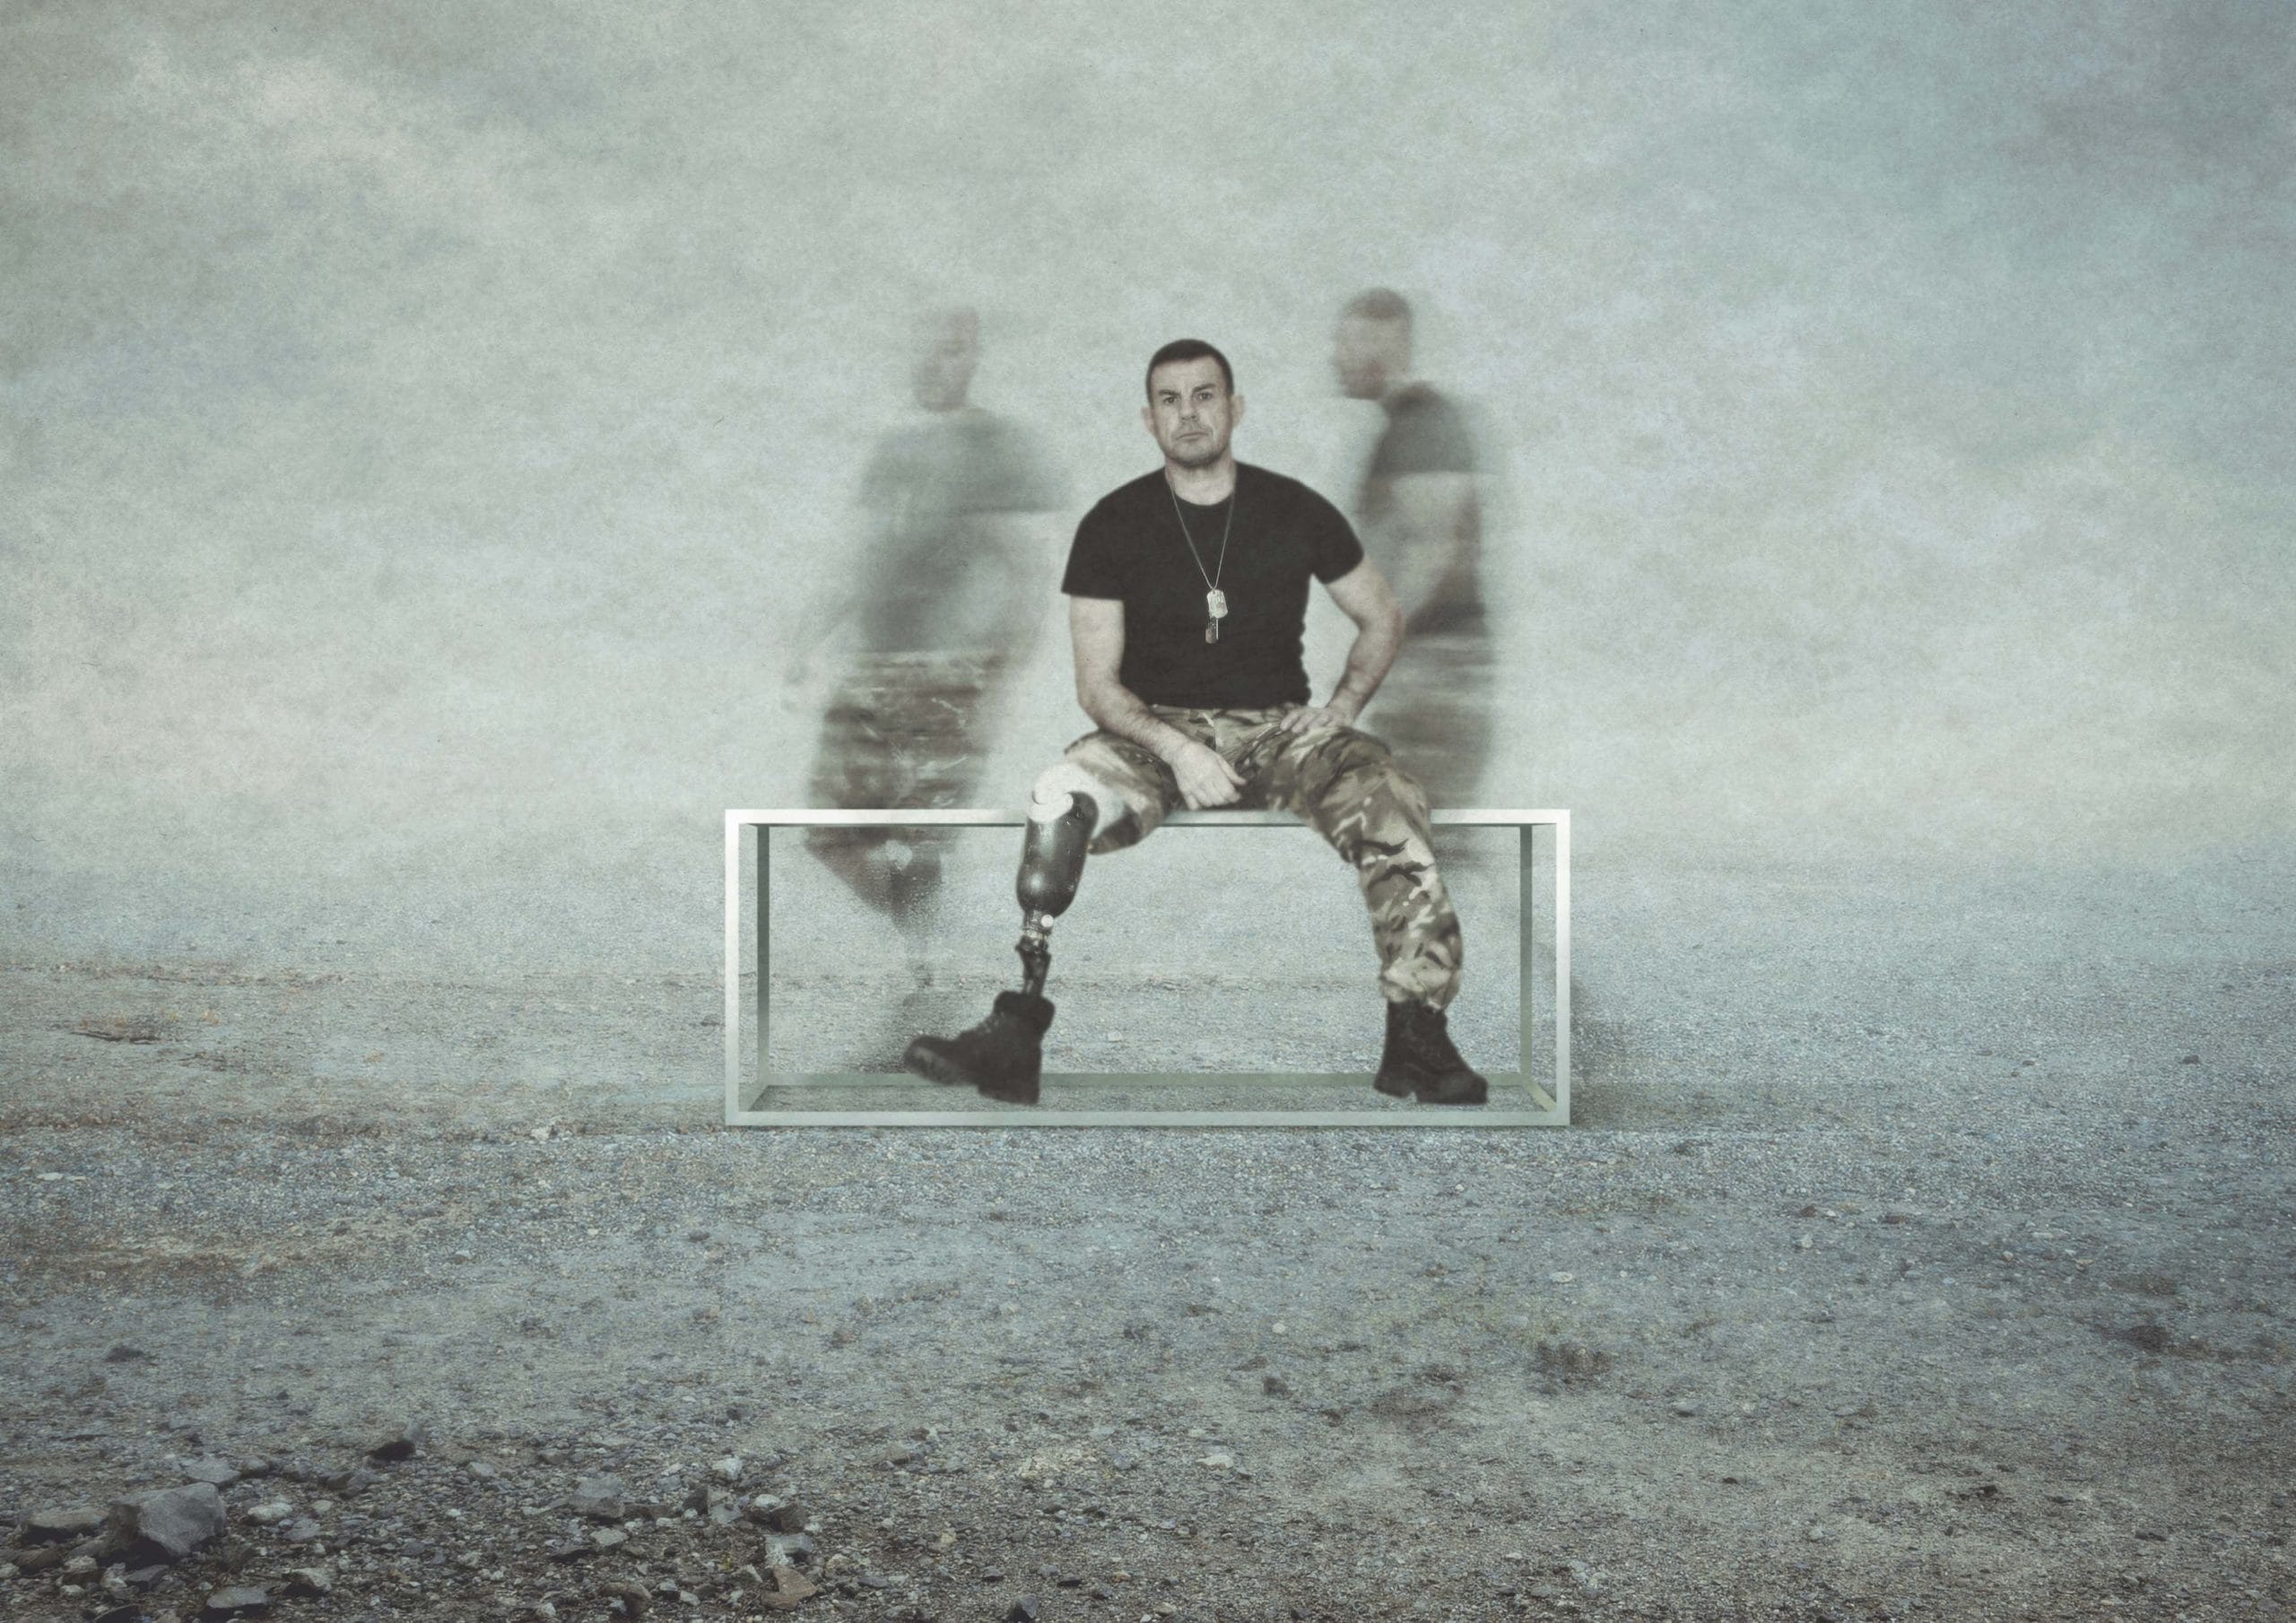 A wounded serviceman with two prosthetic legs sits on a metal structure. The blurred outline of two people rush behind him. His gaze is fixed on the camera in front of him.